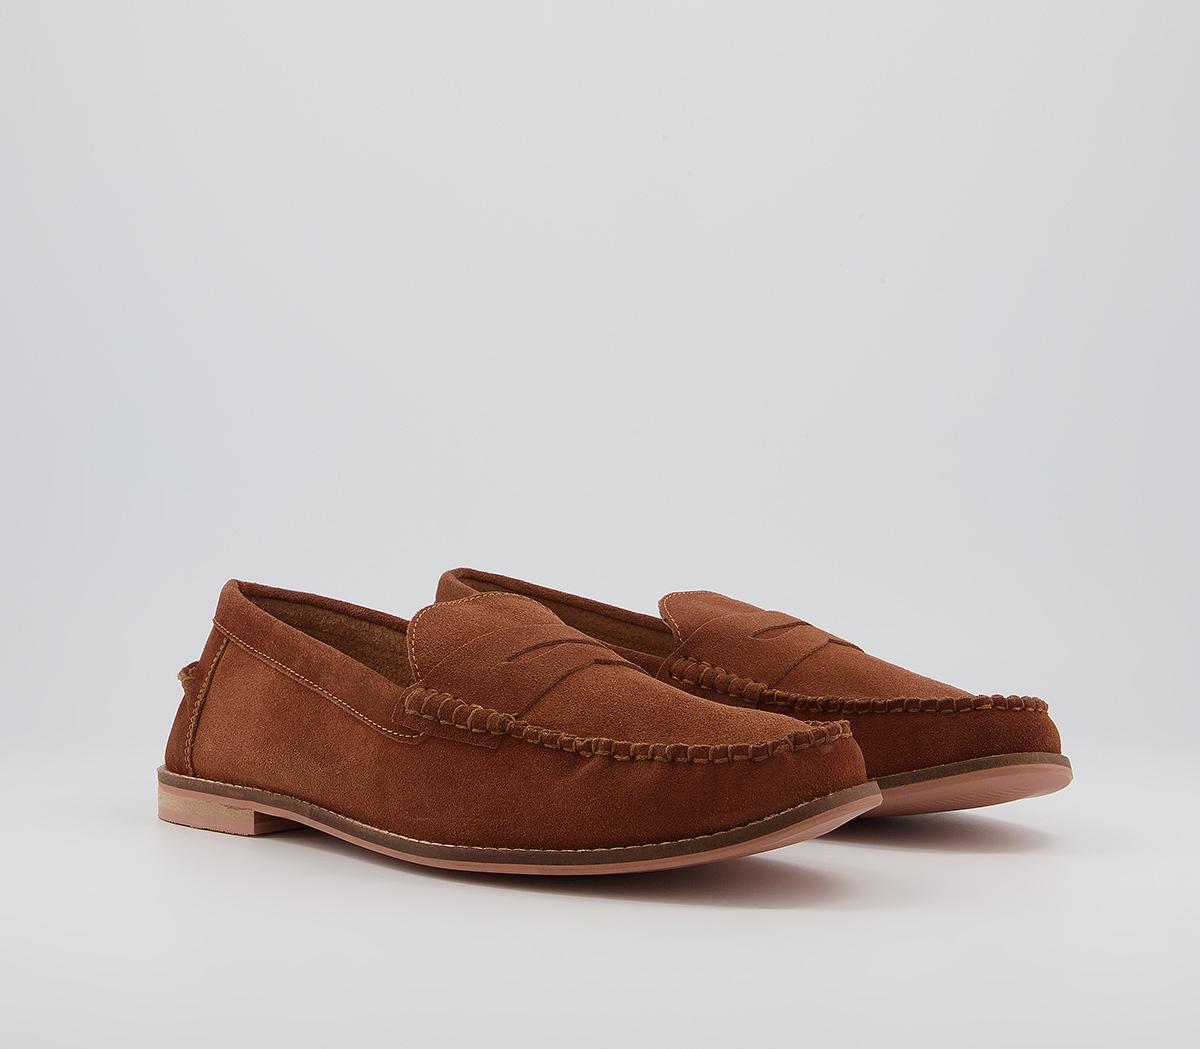 OFFICE Marvin Penny Loafers Rust Tan Suede - Men’s Smart Shoes